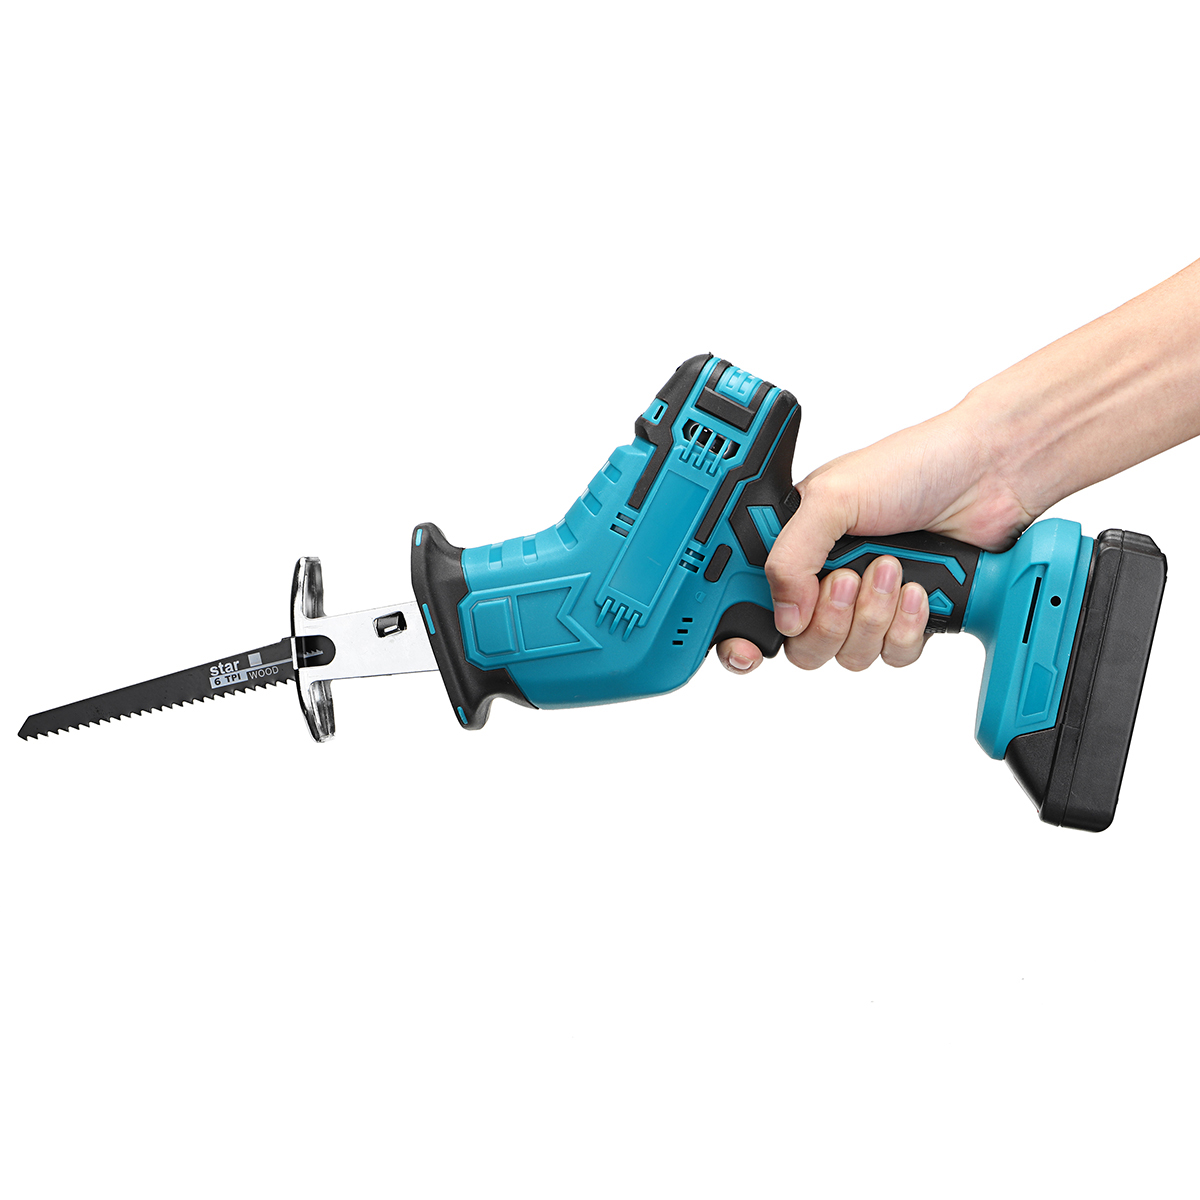 21V-Cordless-Reciprocating-Saw-Electric-Sabre-Saw-Woodworking-Wood-Metal-Cutting-Tool-1762480-5